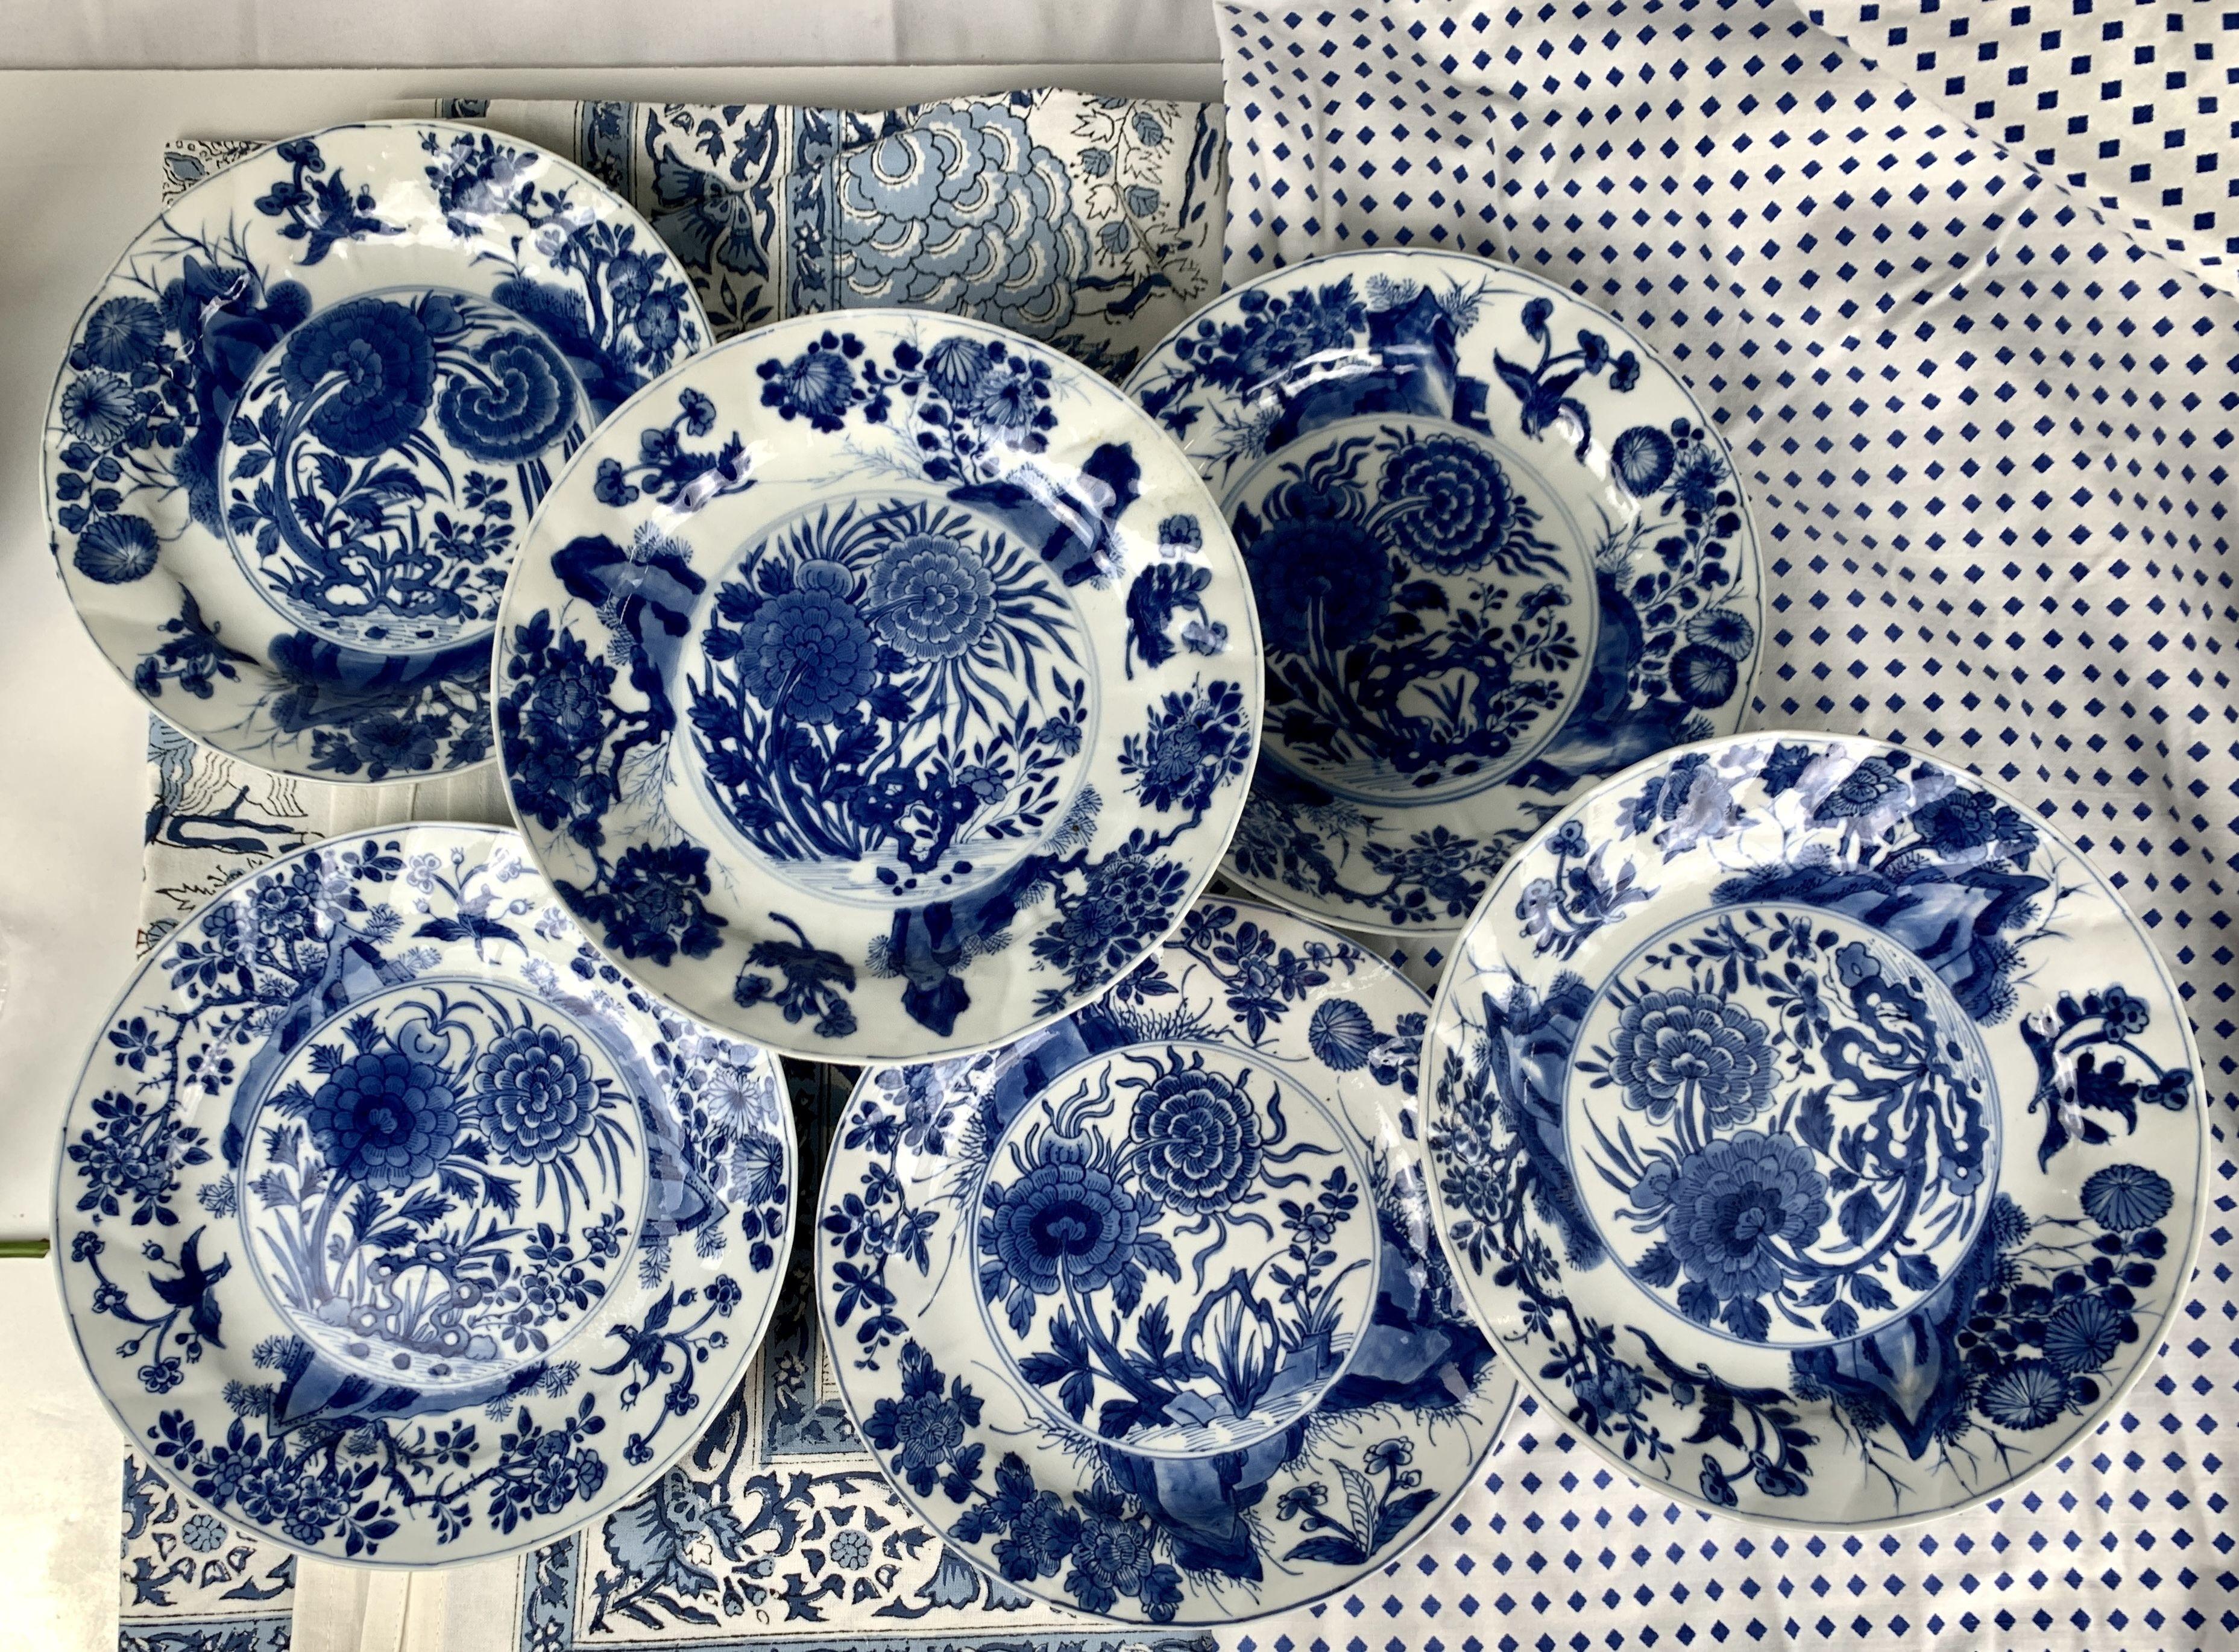 These six beautiful Chinese blue and white porcelain dishes were painted in the Kangxi era circa 1700.
Hand-painted using soft and dark cobalt blue, each dish is slightly different from the others in the set.
The decoration is exquisite!
At the